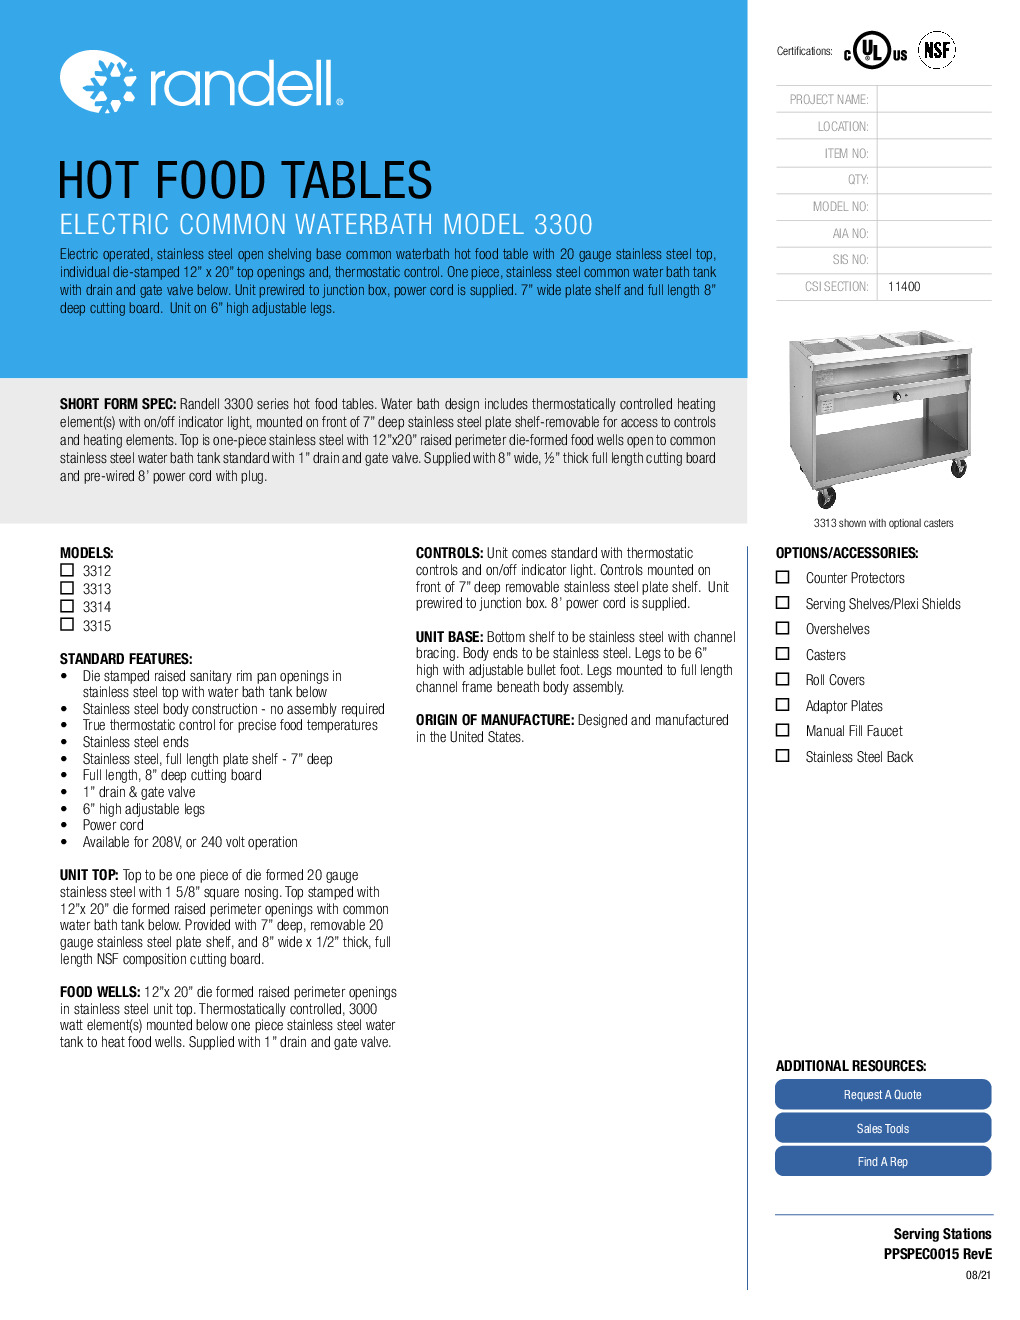 Randell 3312-208 Electric Hot Food Serving Counter